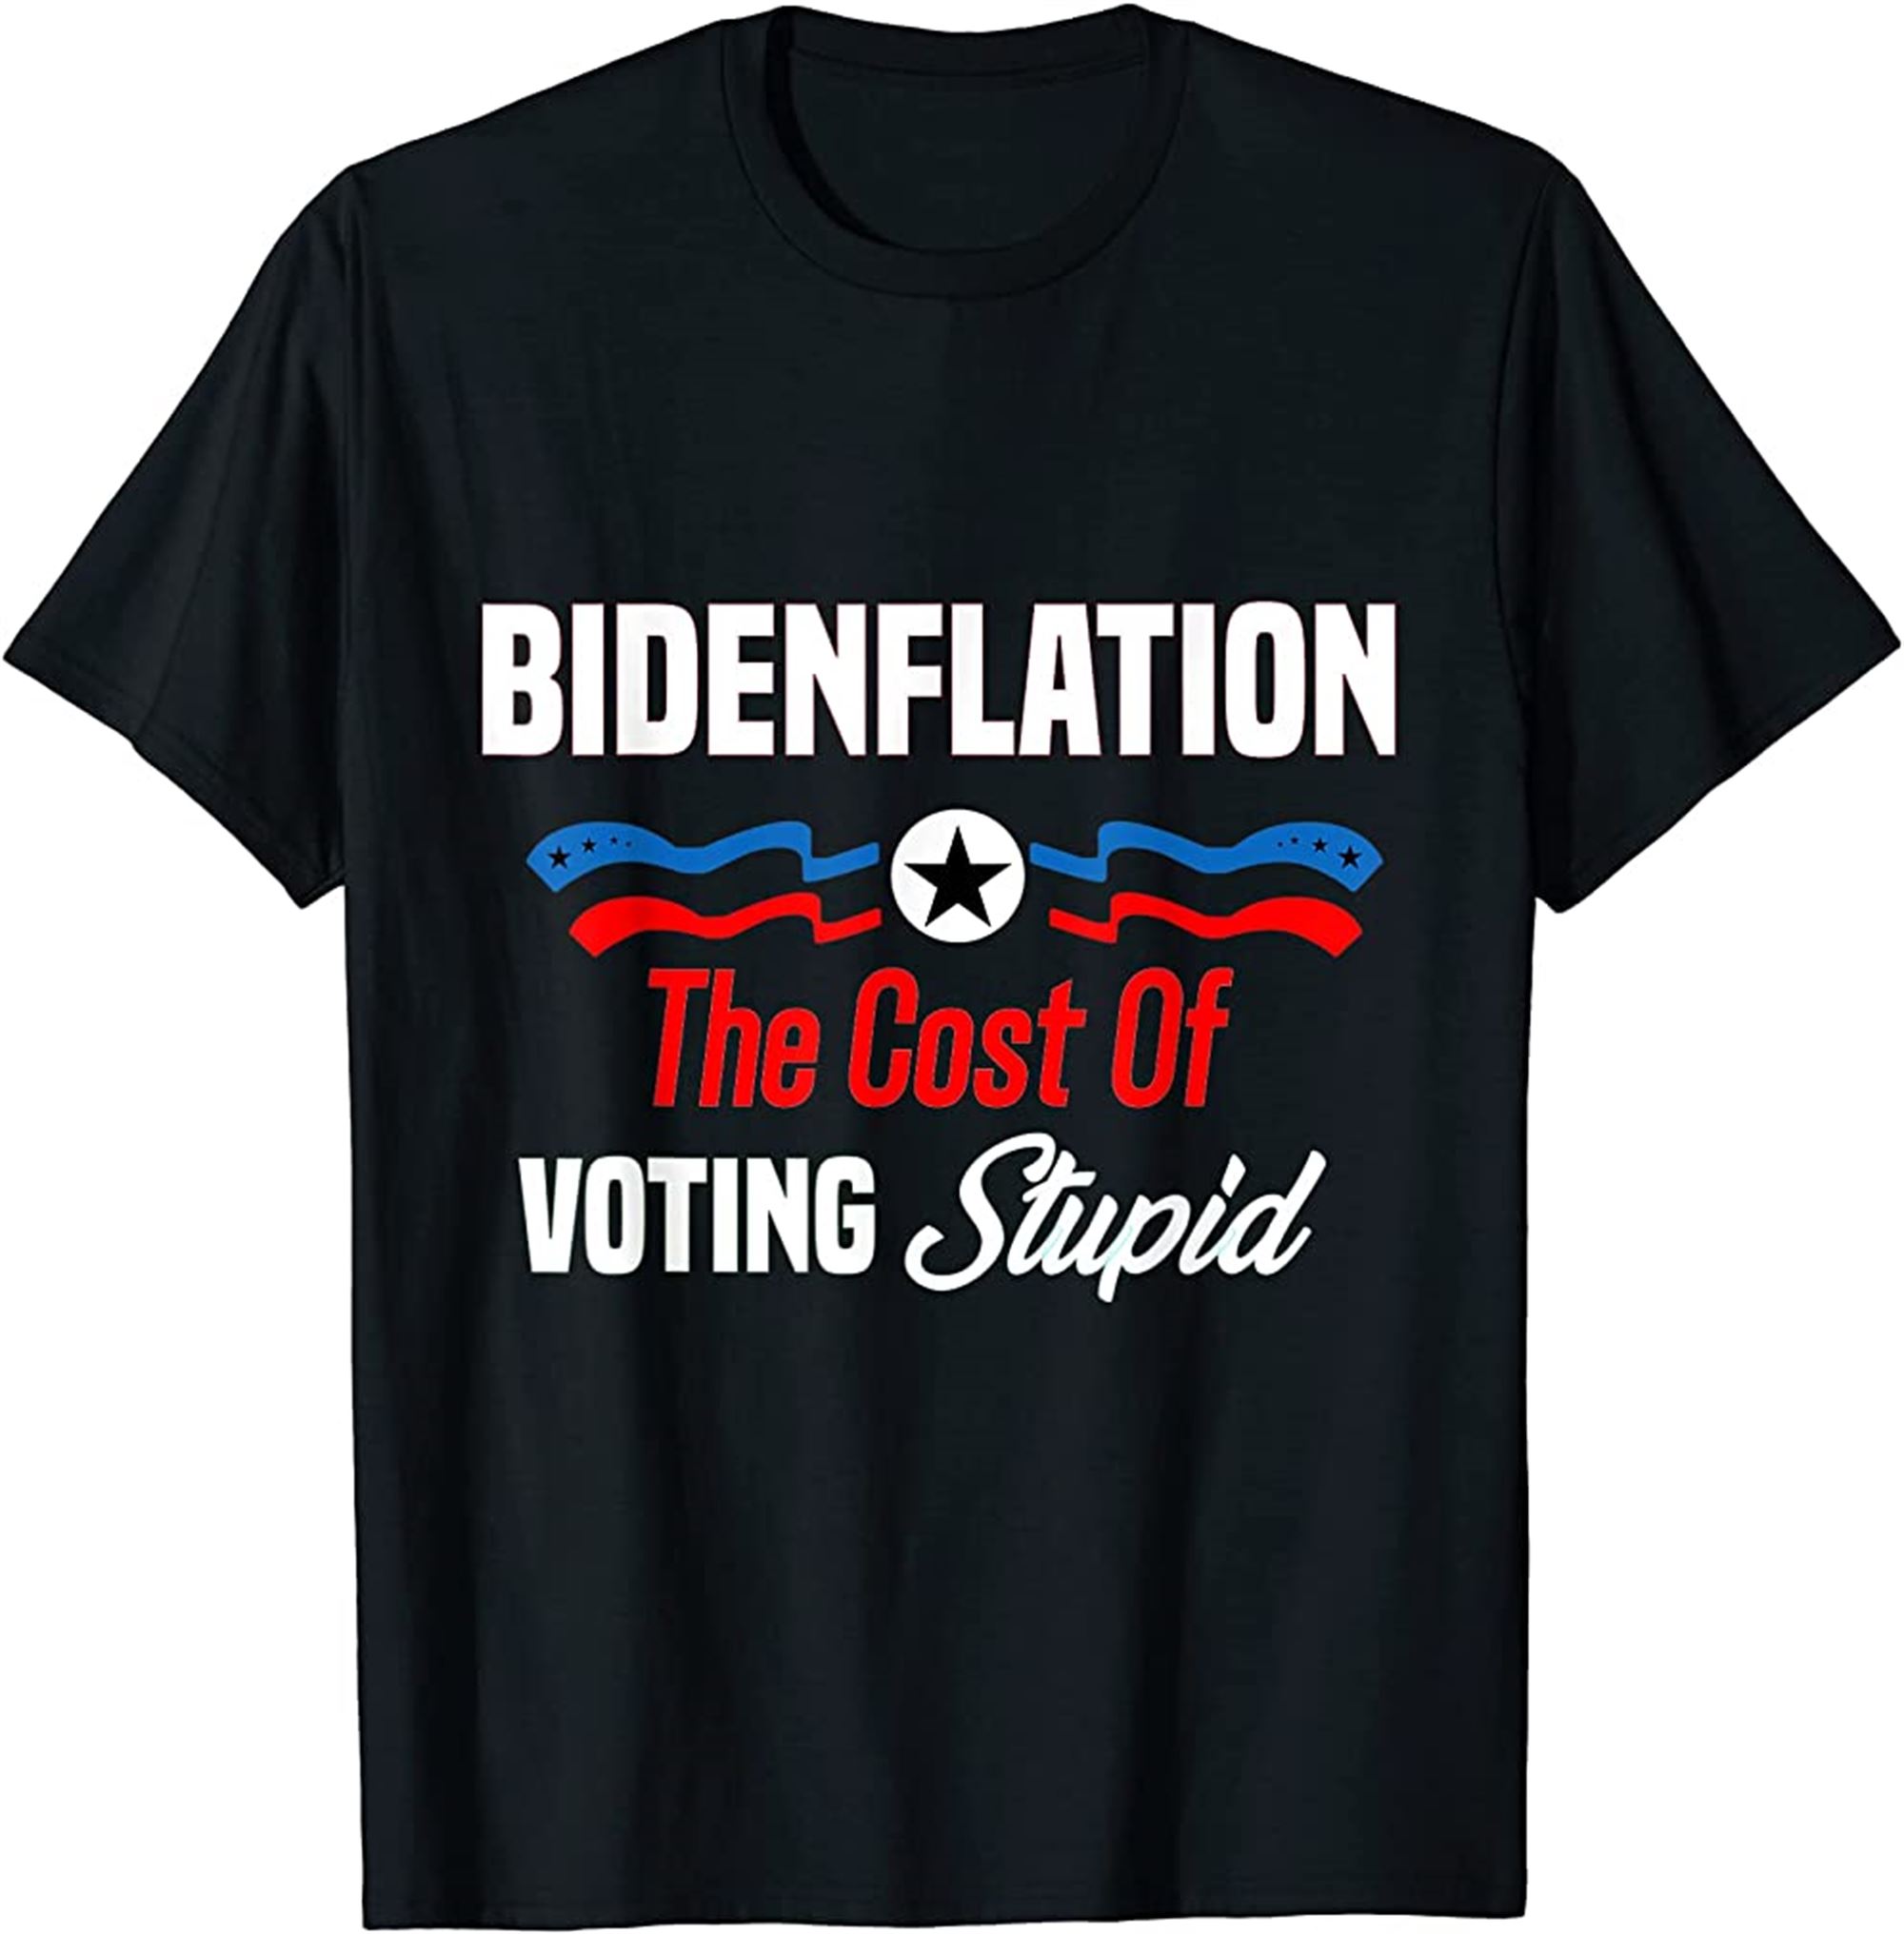 Biden Flation The Cost Of Voting Stupid Easter For Men Women T-shirt Plus Size Up To 5xl